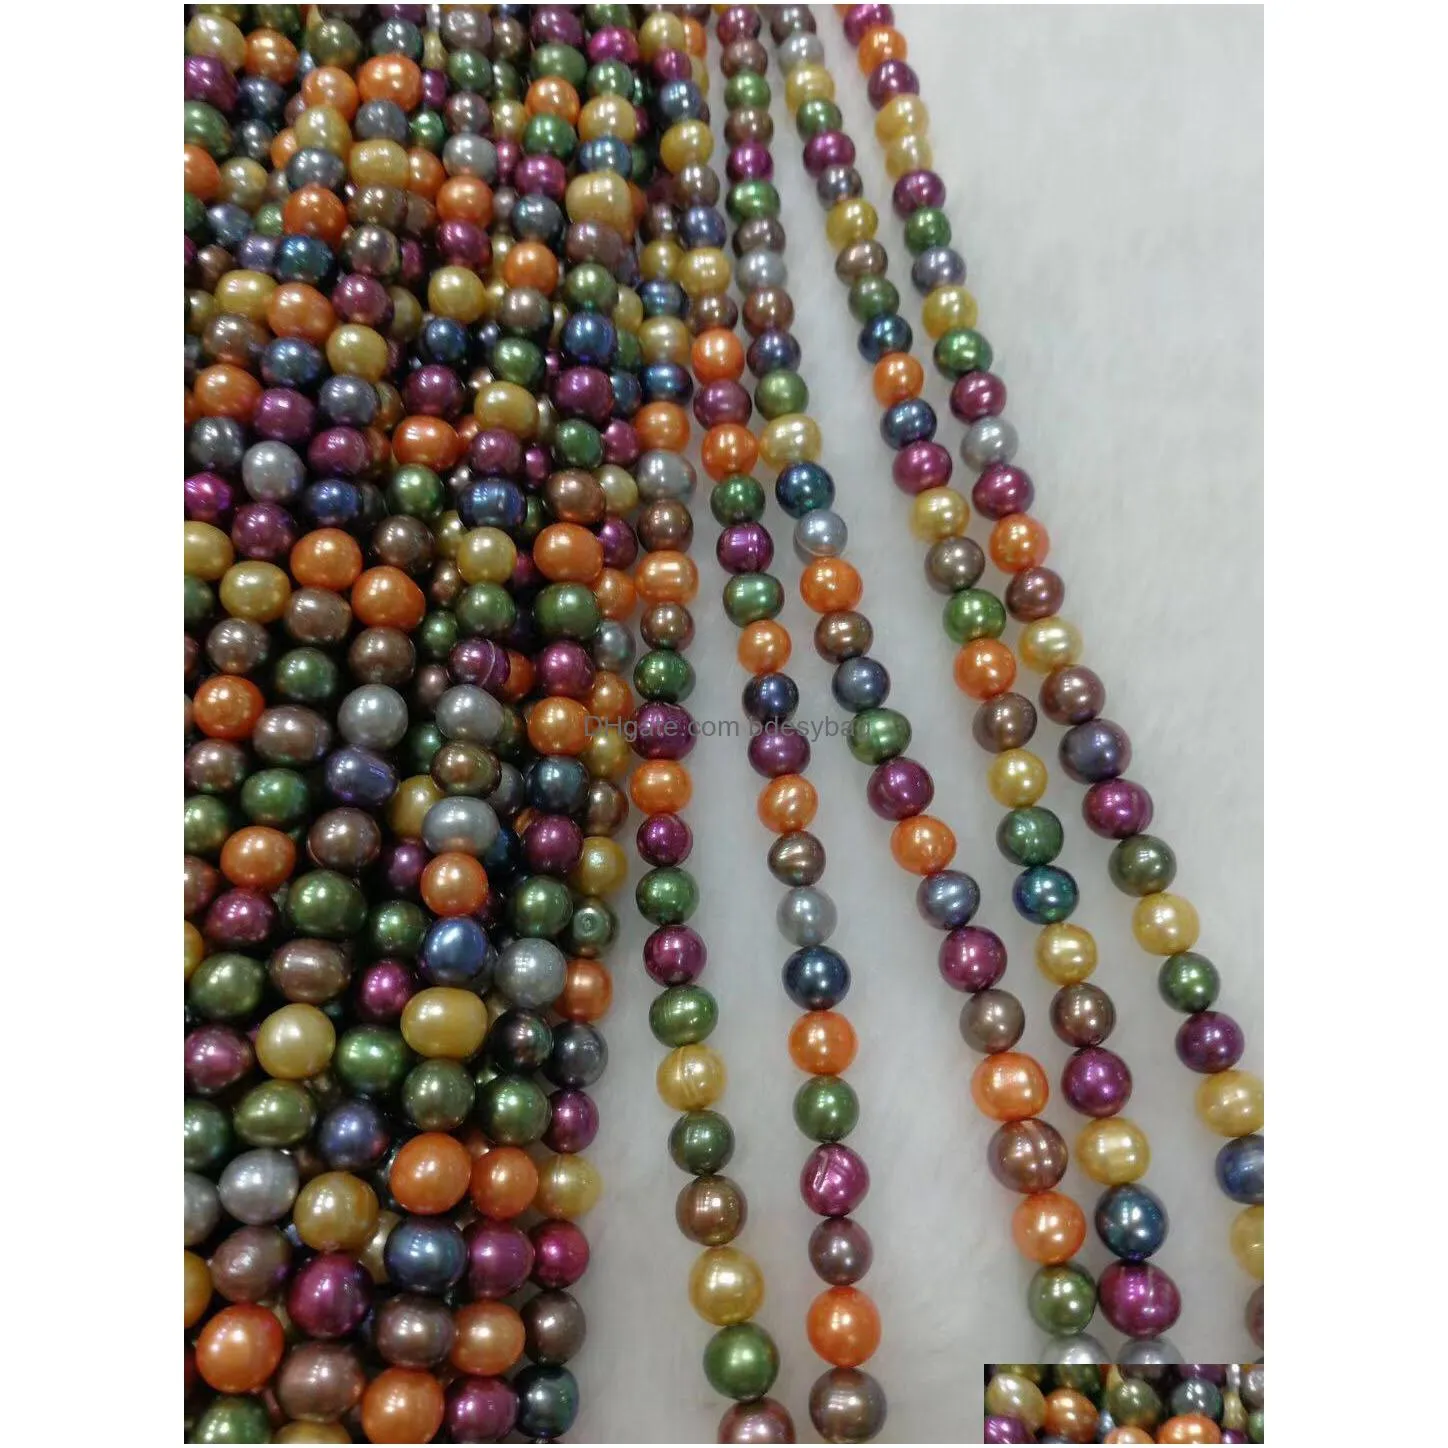  shipping natural freshwater cultured pearl necklace 78mm nearly round pearl long size 48inch necklace faishon jewelry